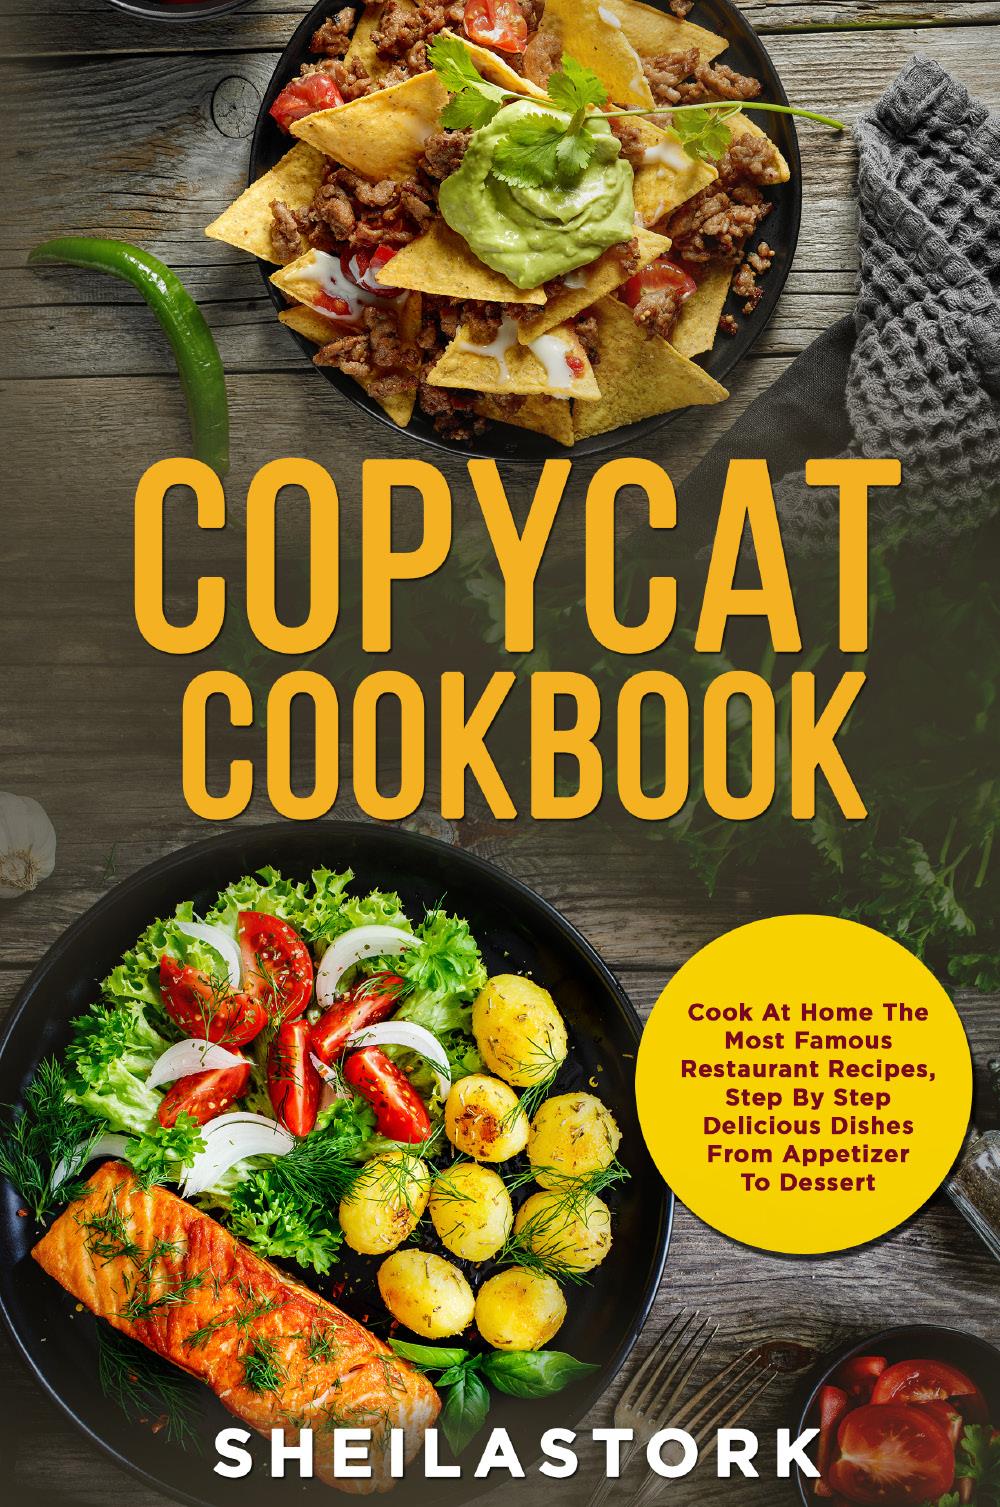 Copycat Cookbook. Cook At Home The Most Famous Restaurant Recipes, Step By Step Delicious Dishes From Appetizer To Dessert